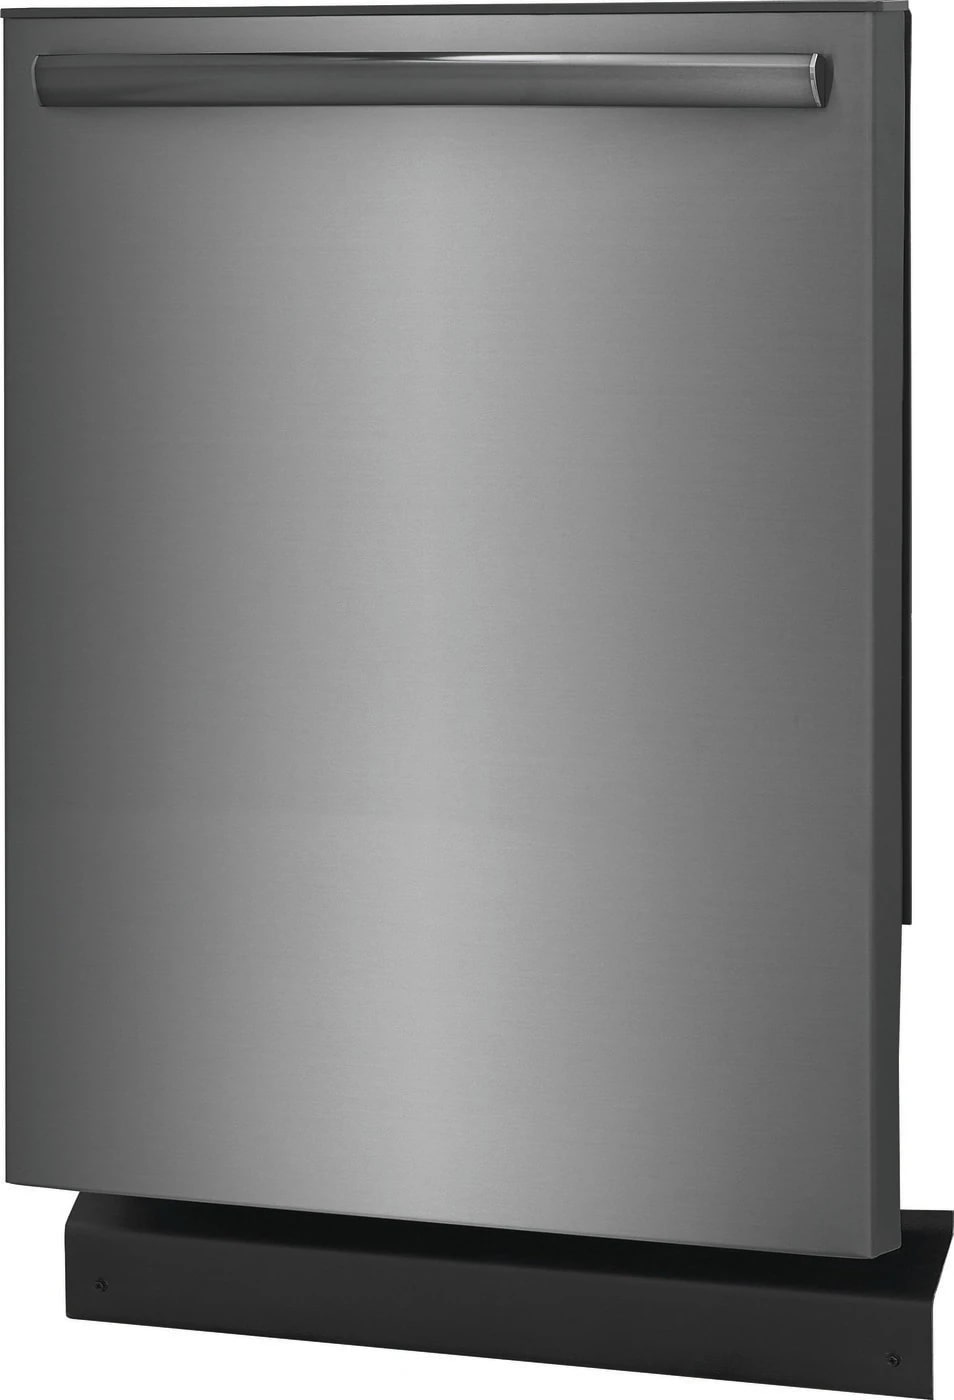 Frigidaire Gallery - 52 dBA Built In Dishwasher in Black Stainless - GDPH4515AD